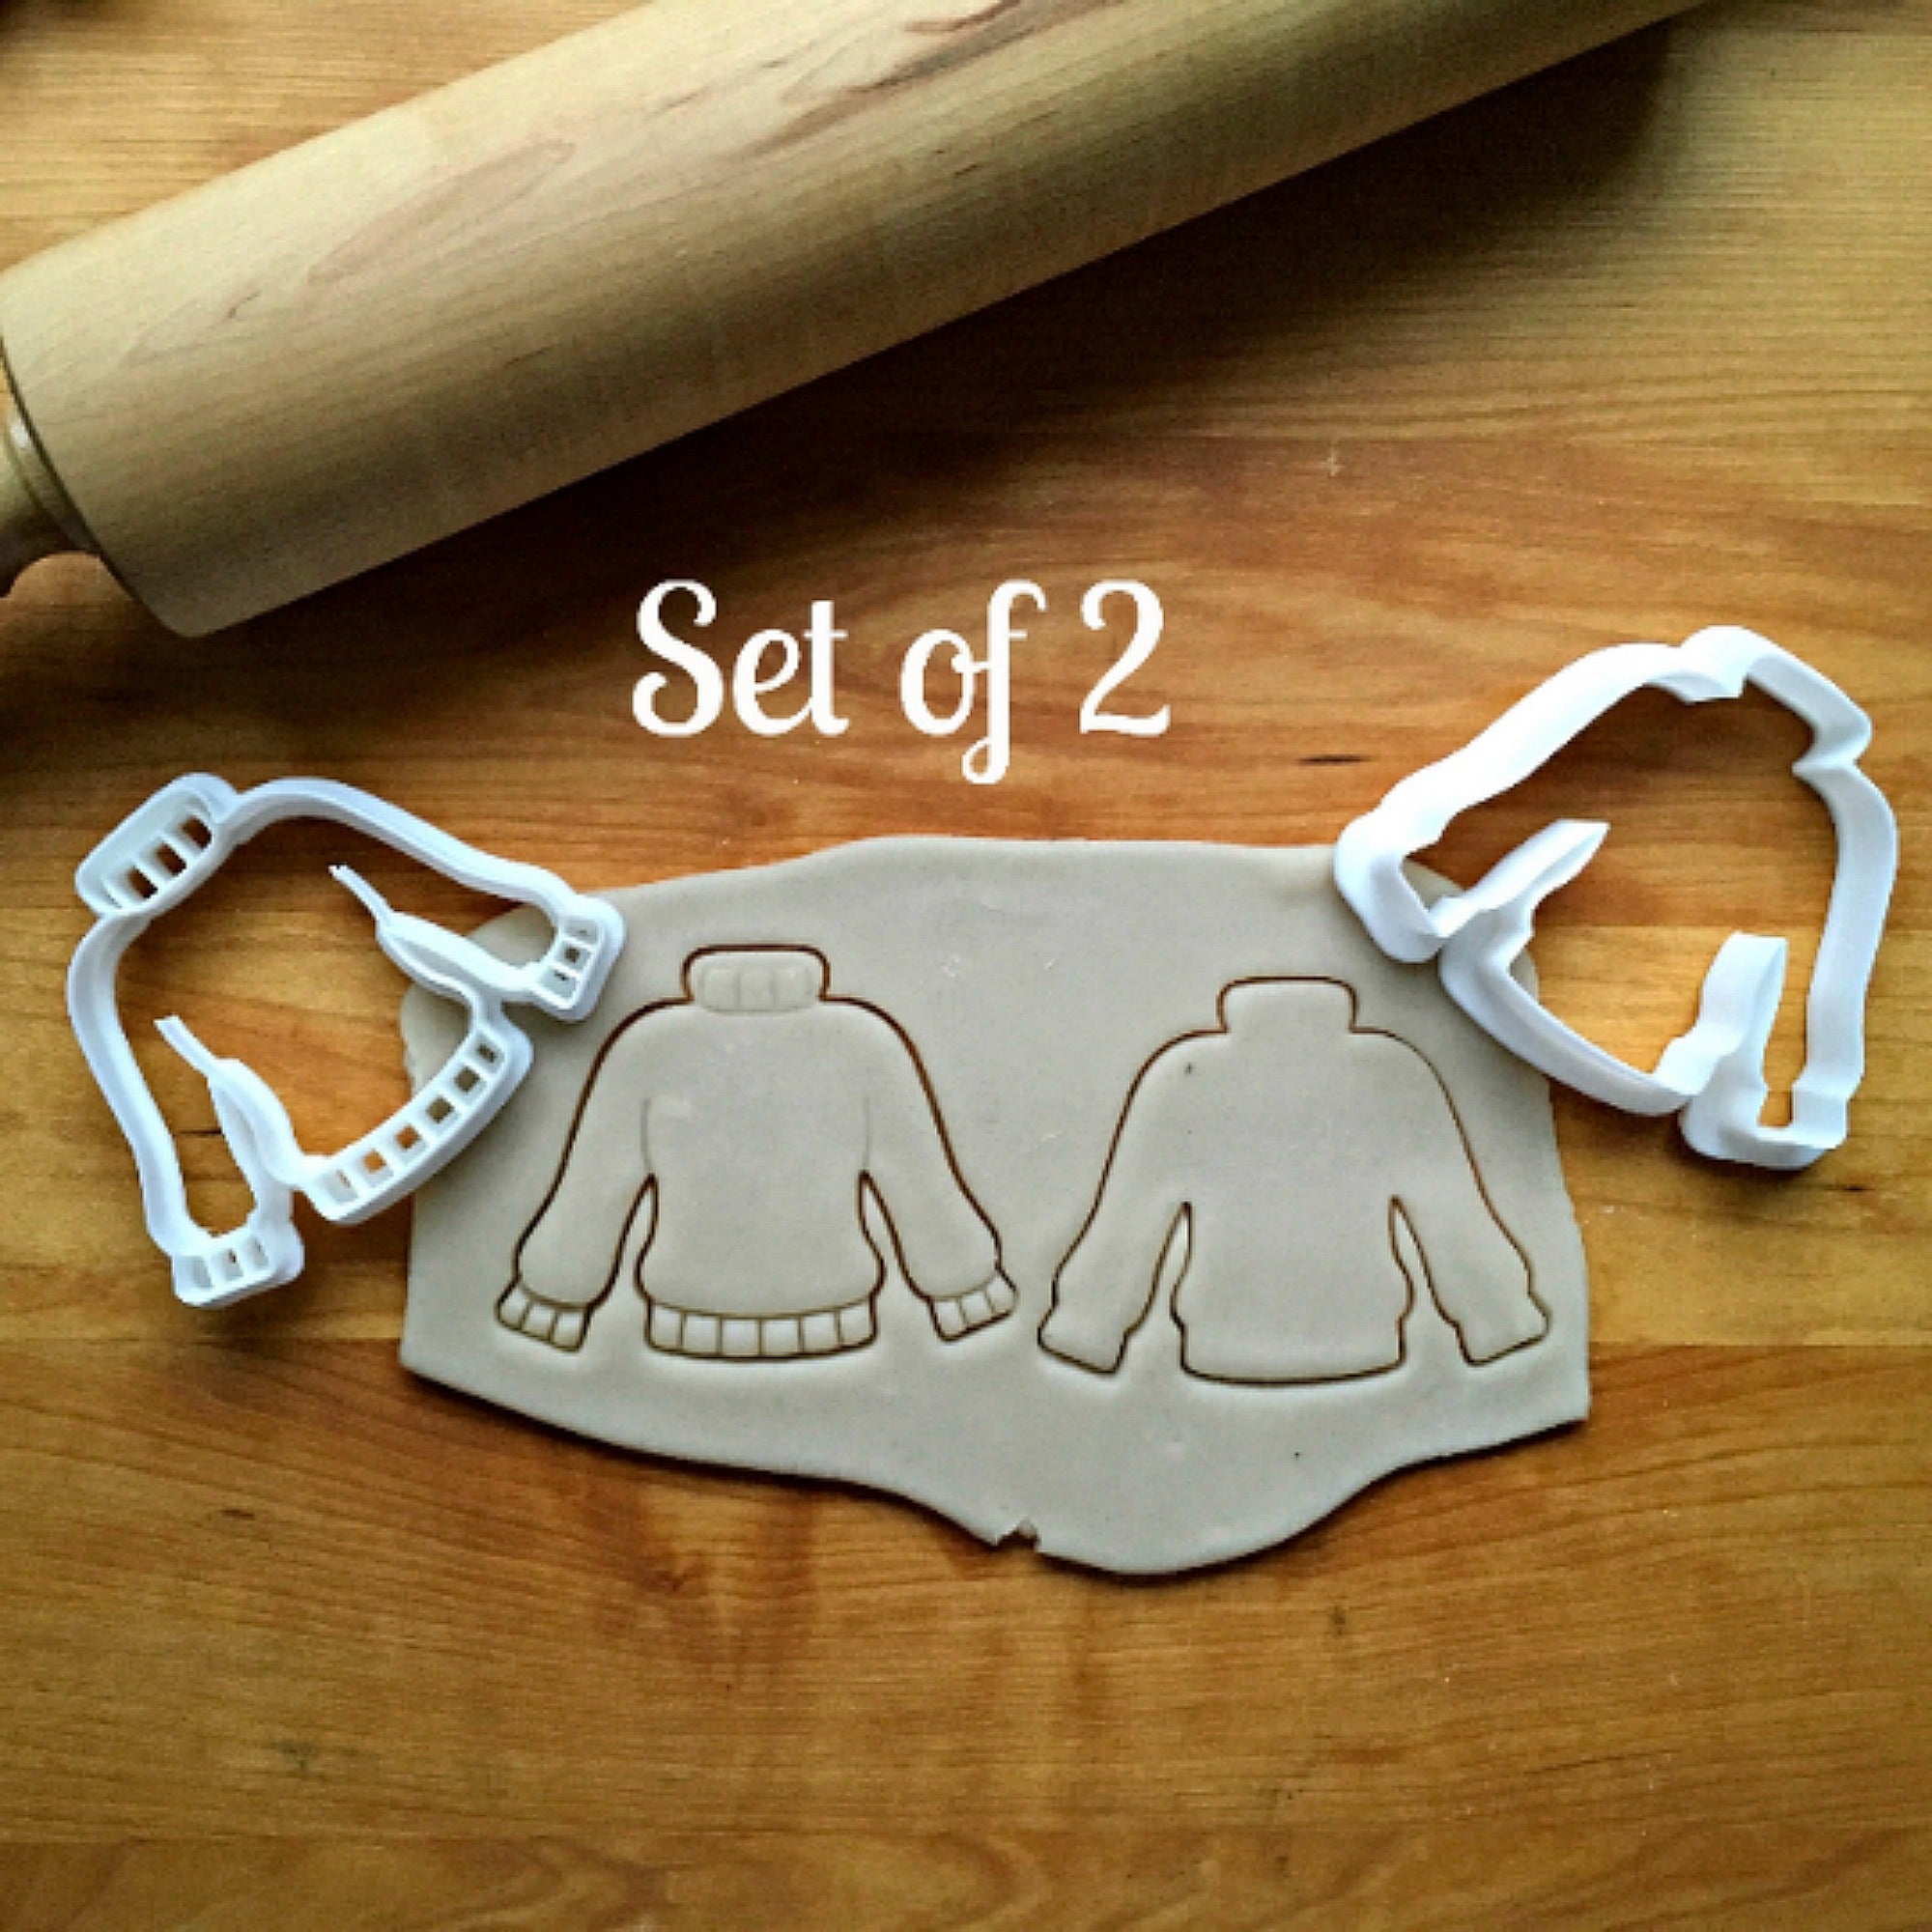 Set of 2 Sweater Cookie Cutters/Dishwasher Safe